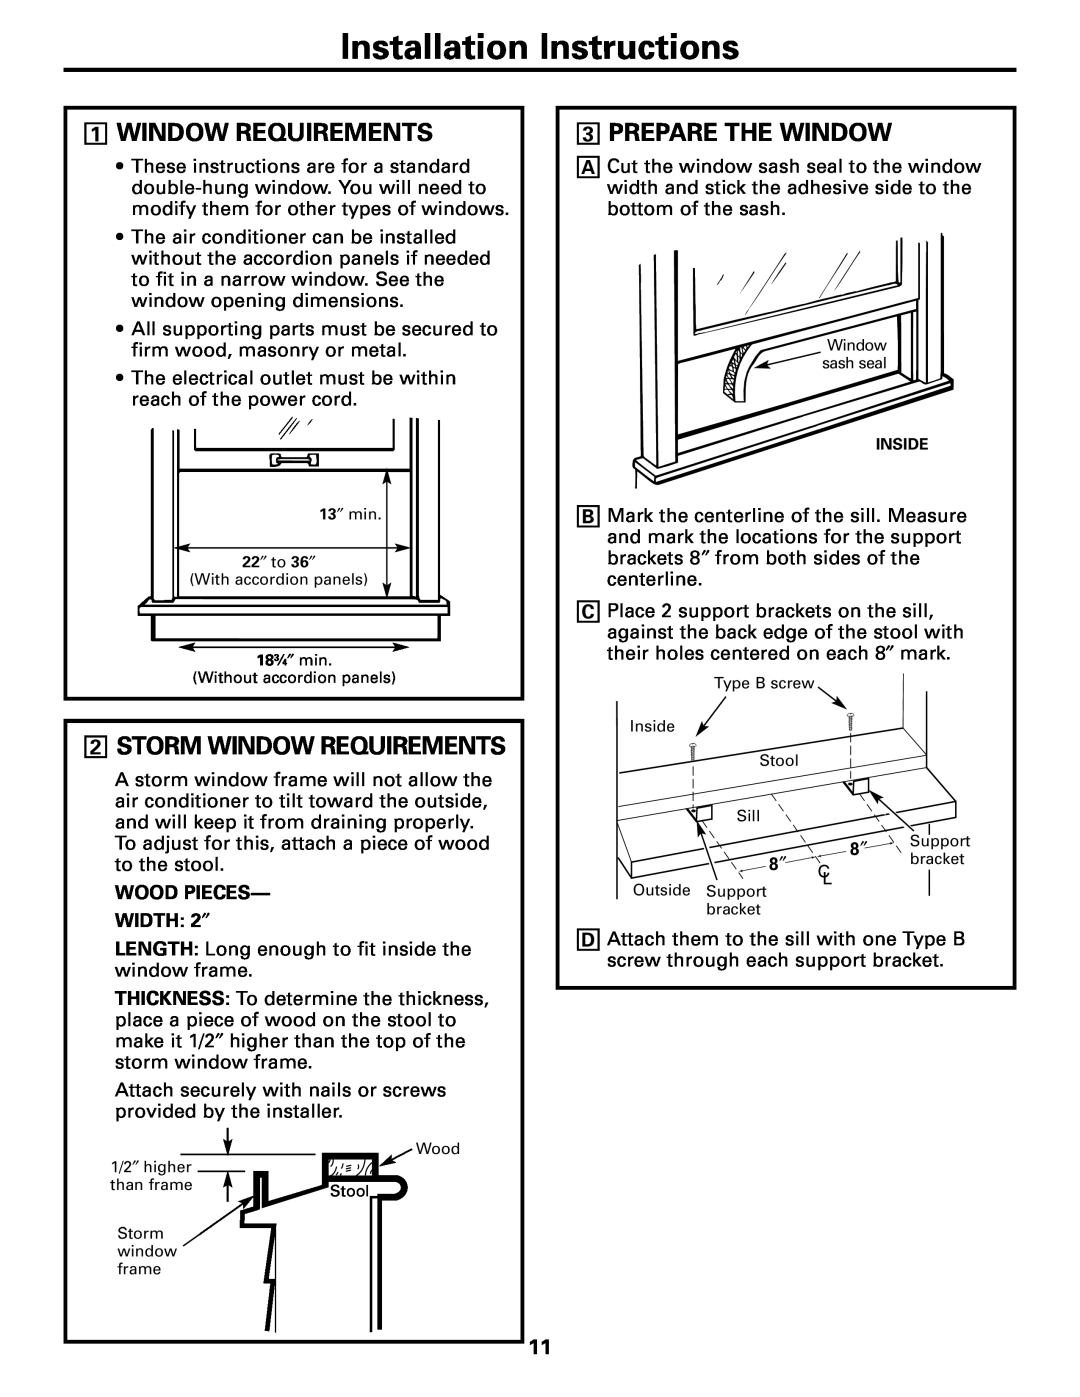 GE AGH06, AGW06 1WINDOW REQUIREMENTS, 2STORM WINDOW REQUIREMENTS, 3PREPARE THE WINDOW, Installation Instructions 